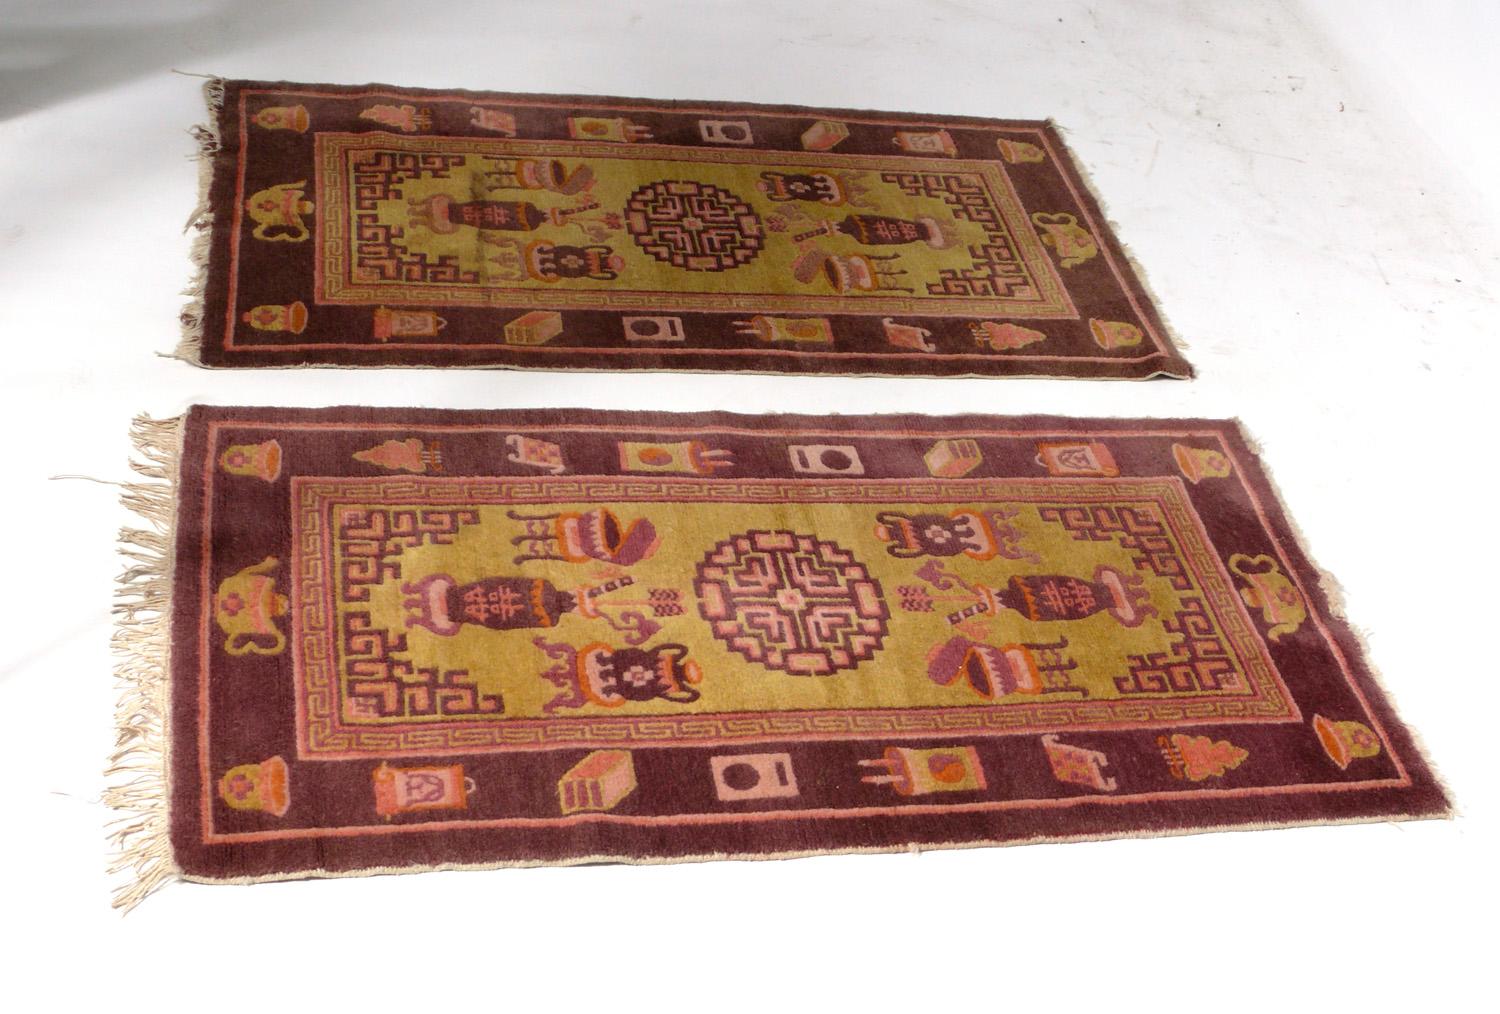 Pair of Chinese Art Deco carpet or rug runners, circa 1930s. Beautiful colors and rare to find a pair. They measure 45